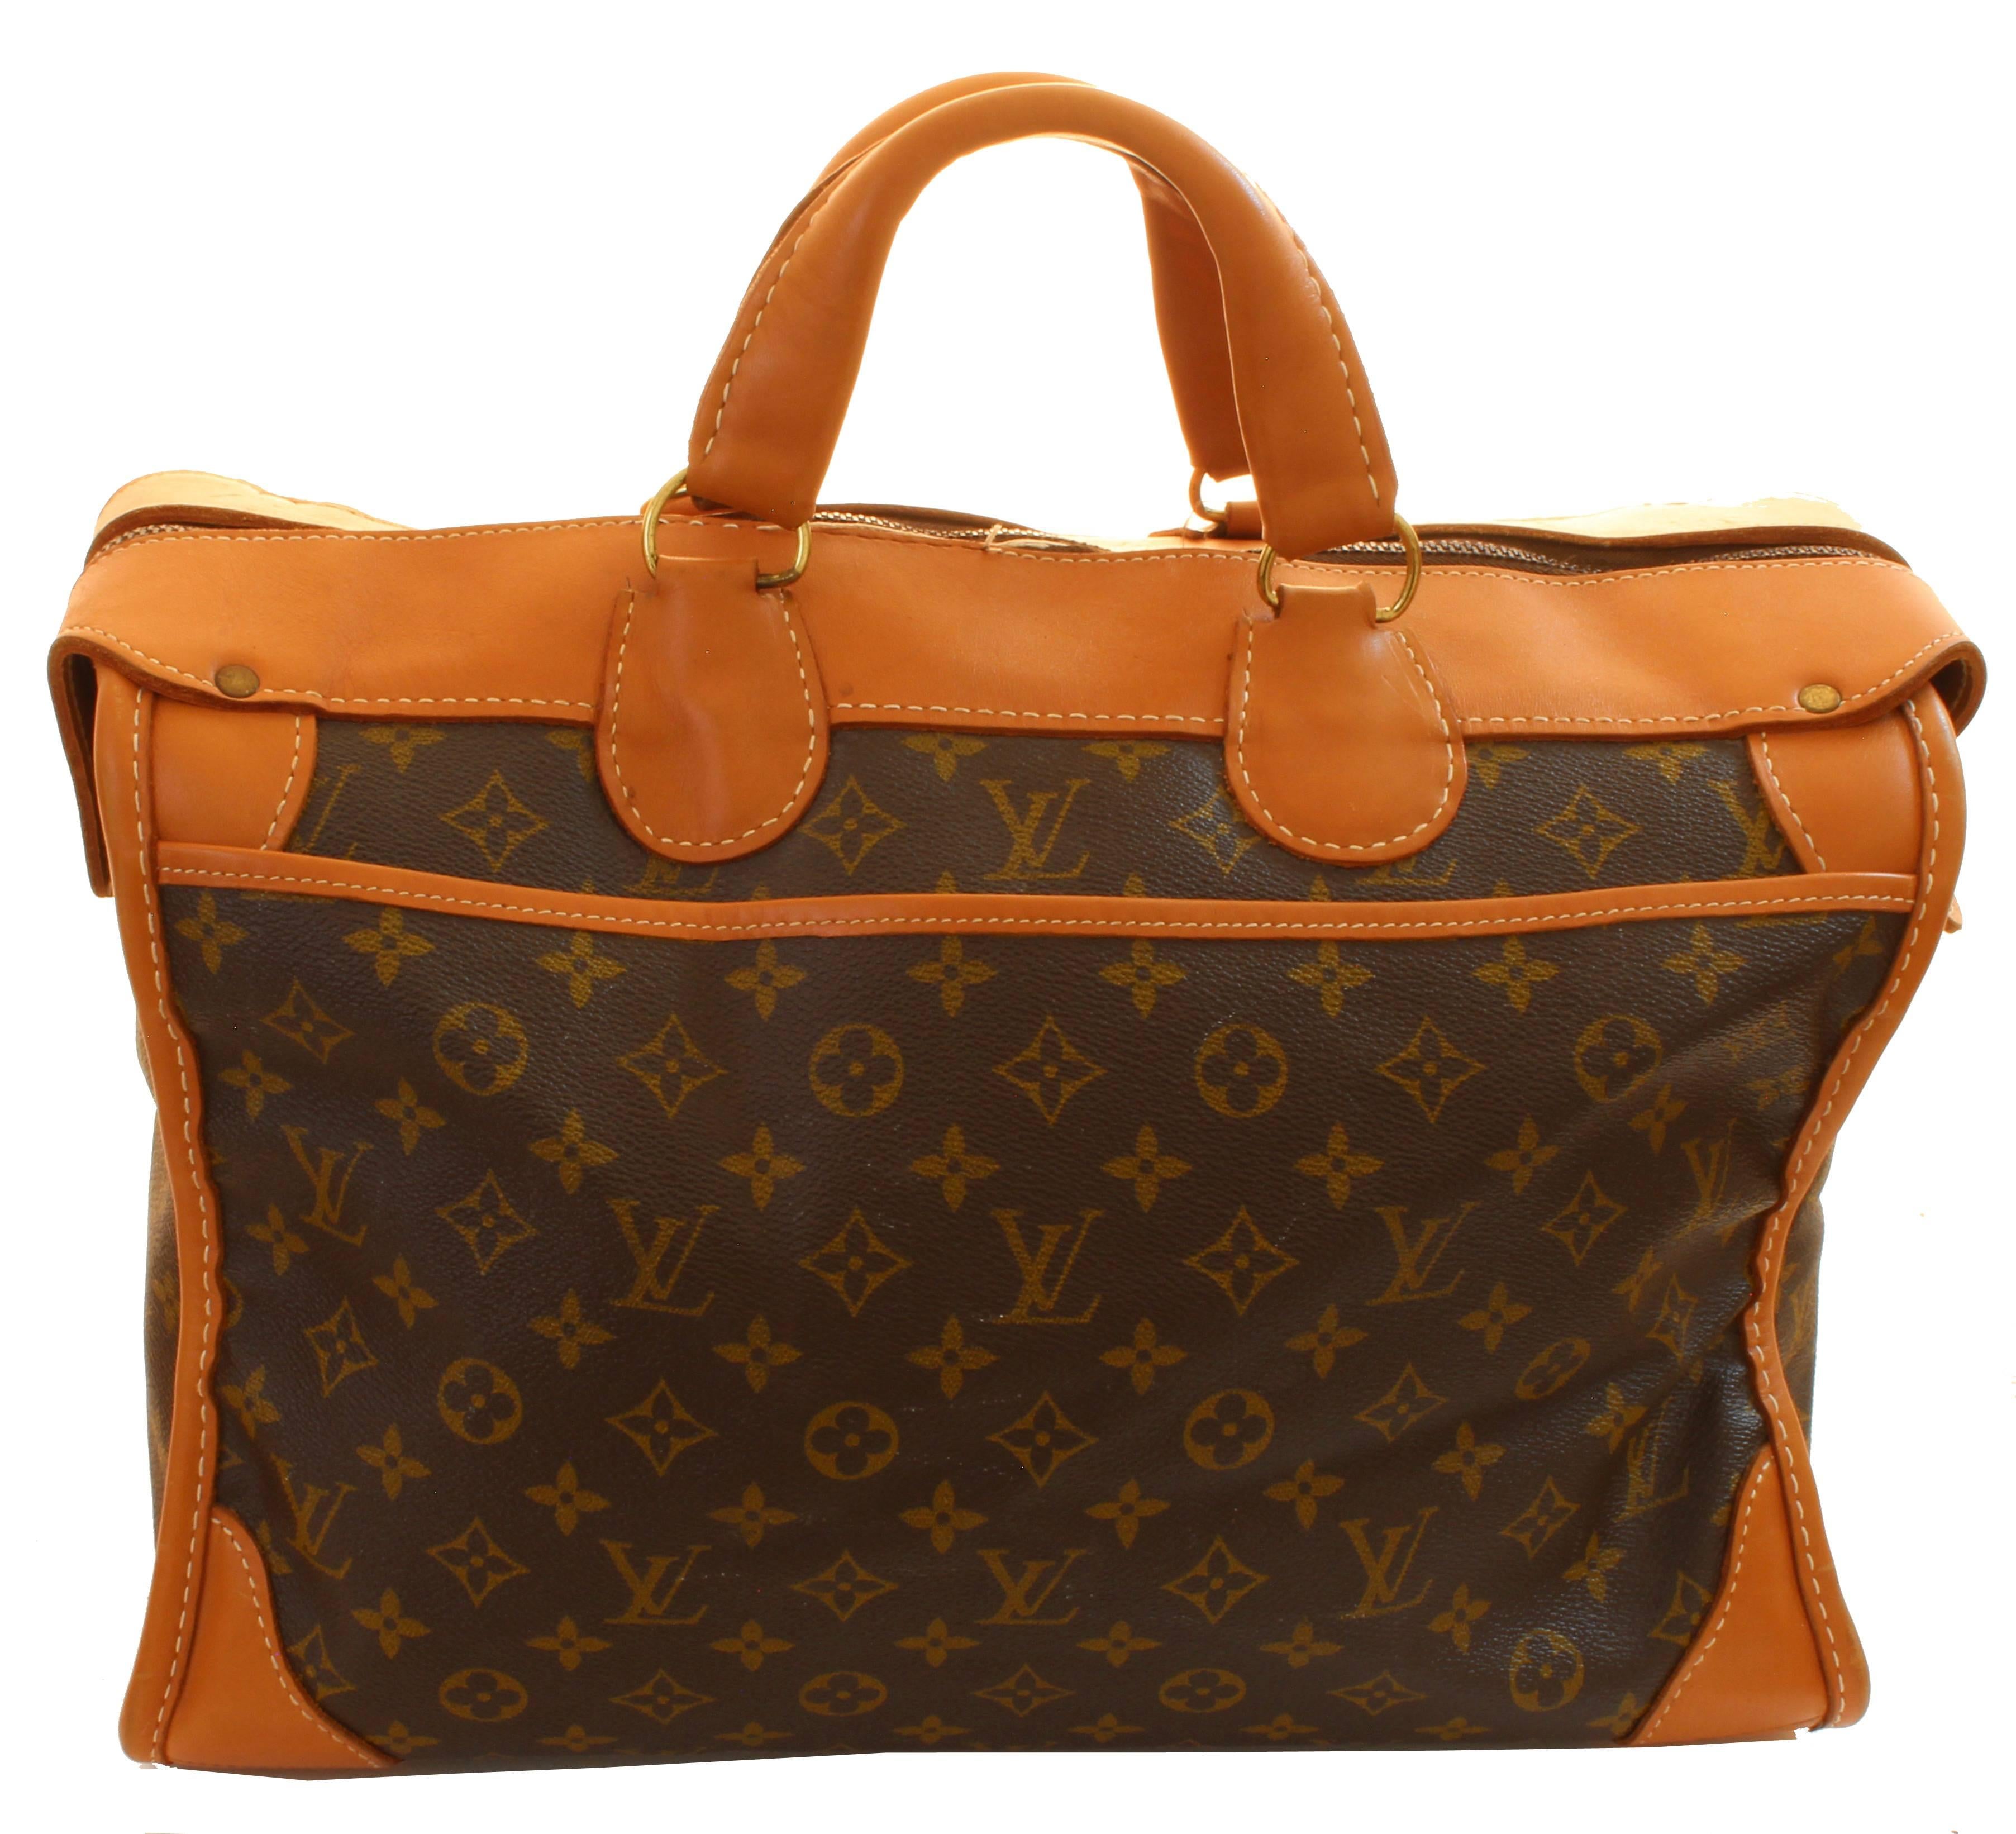 Brown Louis Vuitton Monogram Tote Bag Carry On Keepall Luggage French Company 70s 